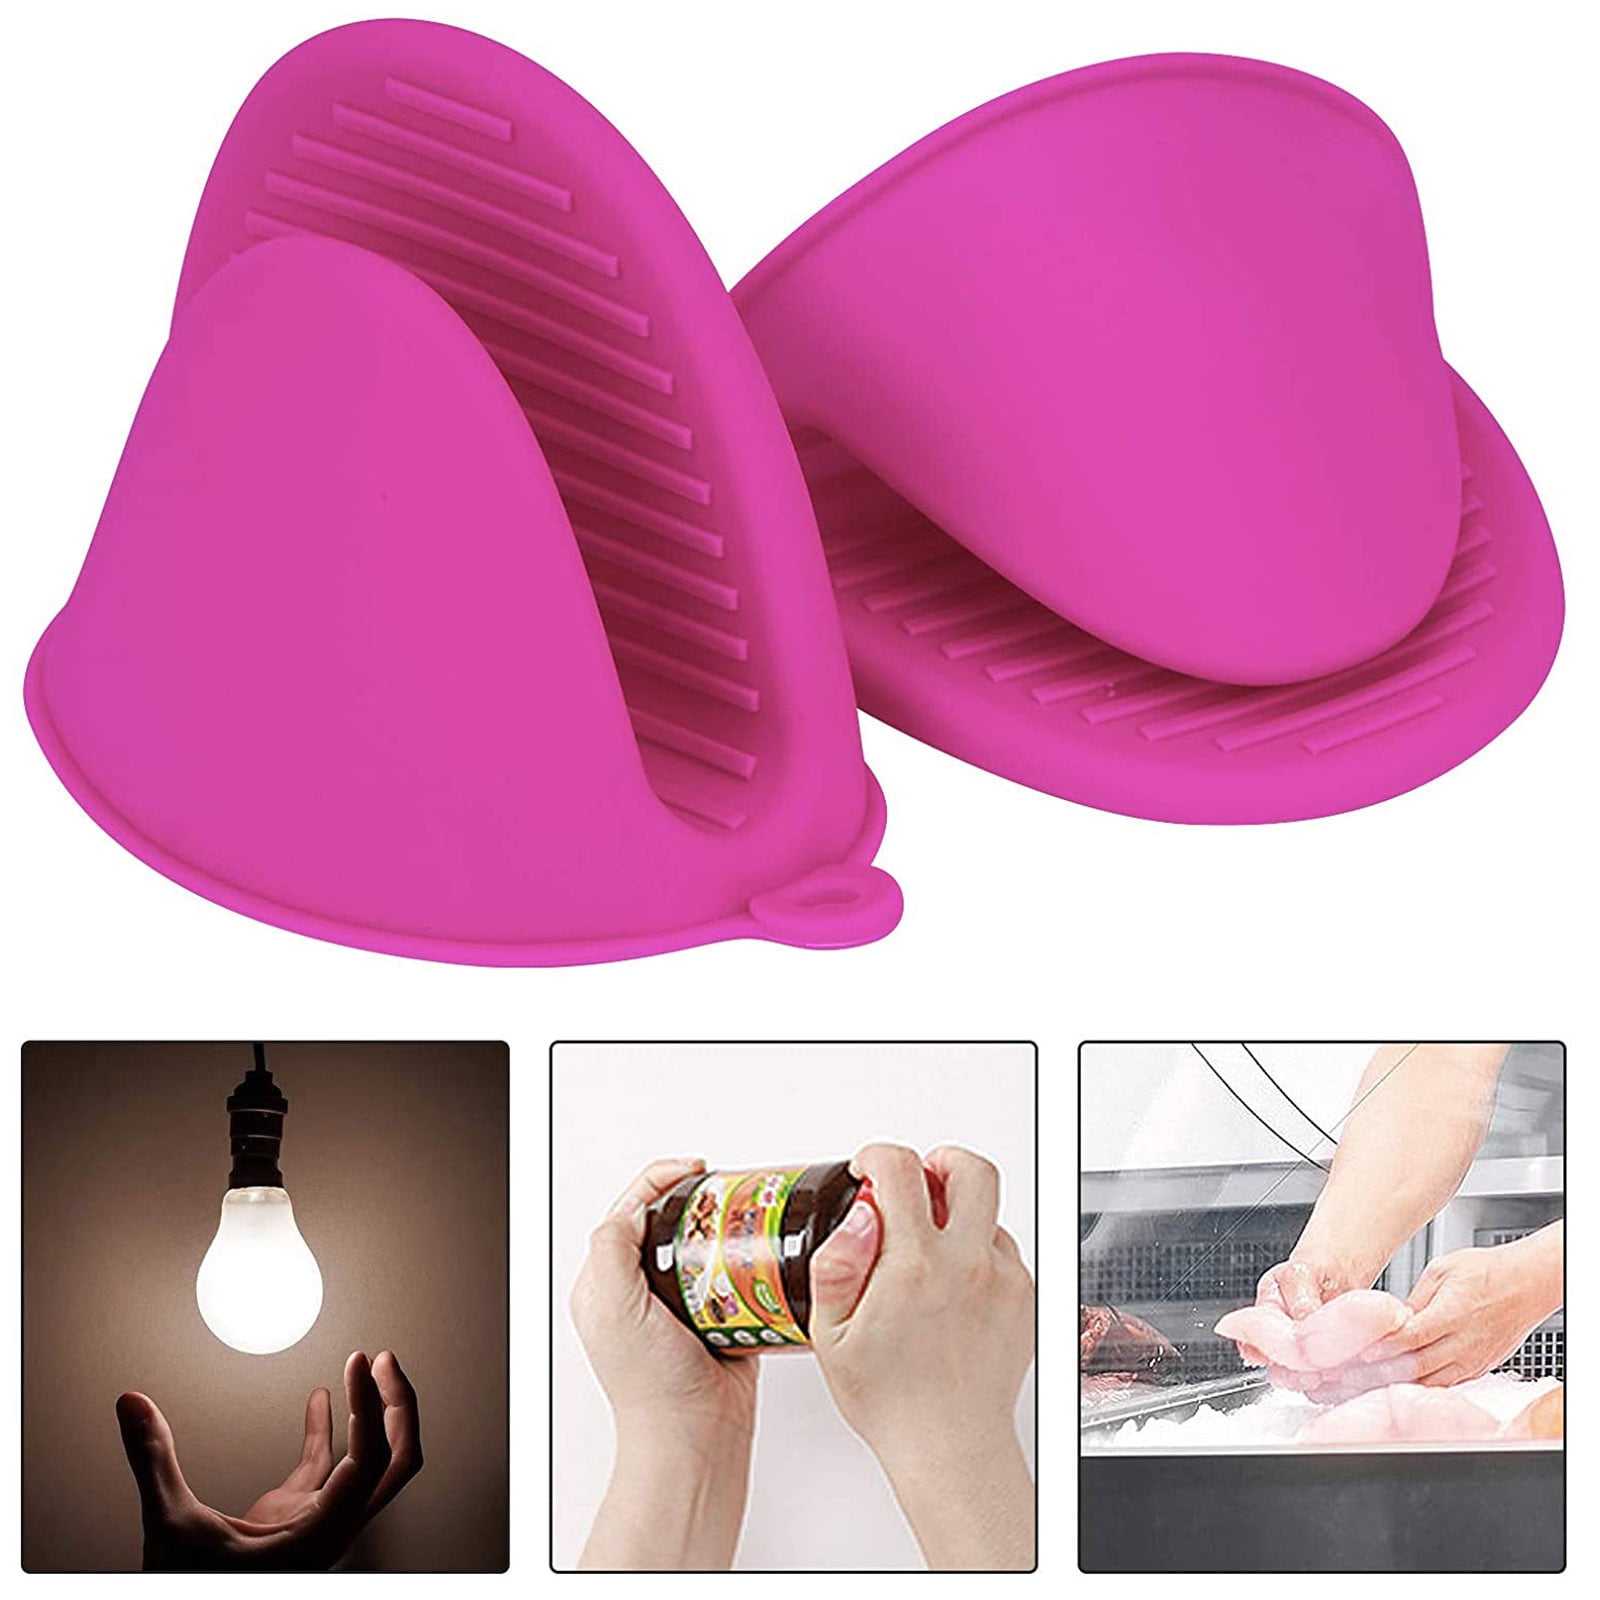 Kitchen Silica Microwave Oven Insulation Gloves Silicone Oven Insulated Gloves